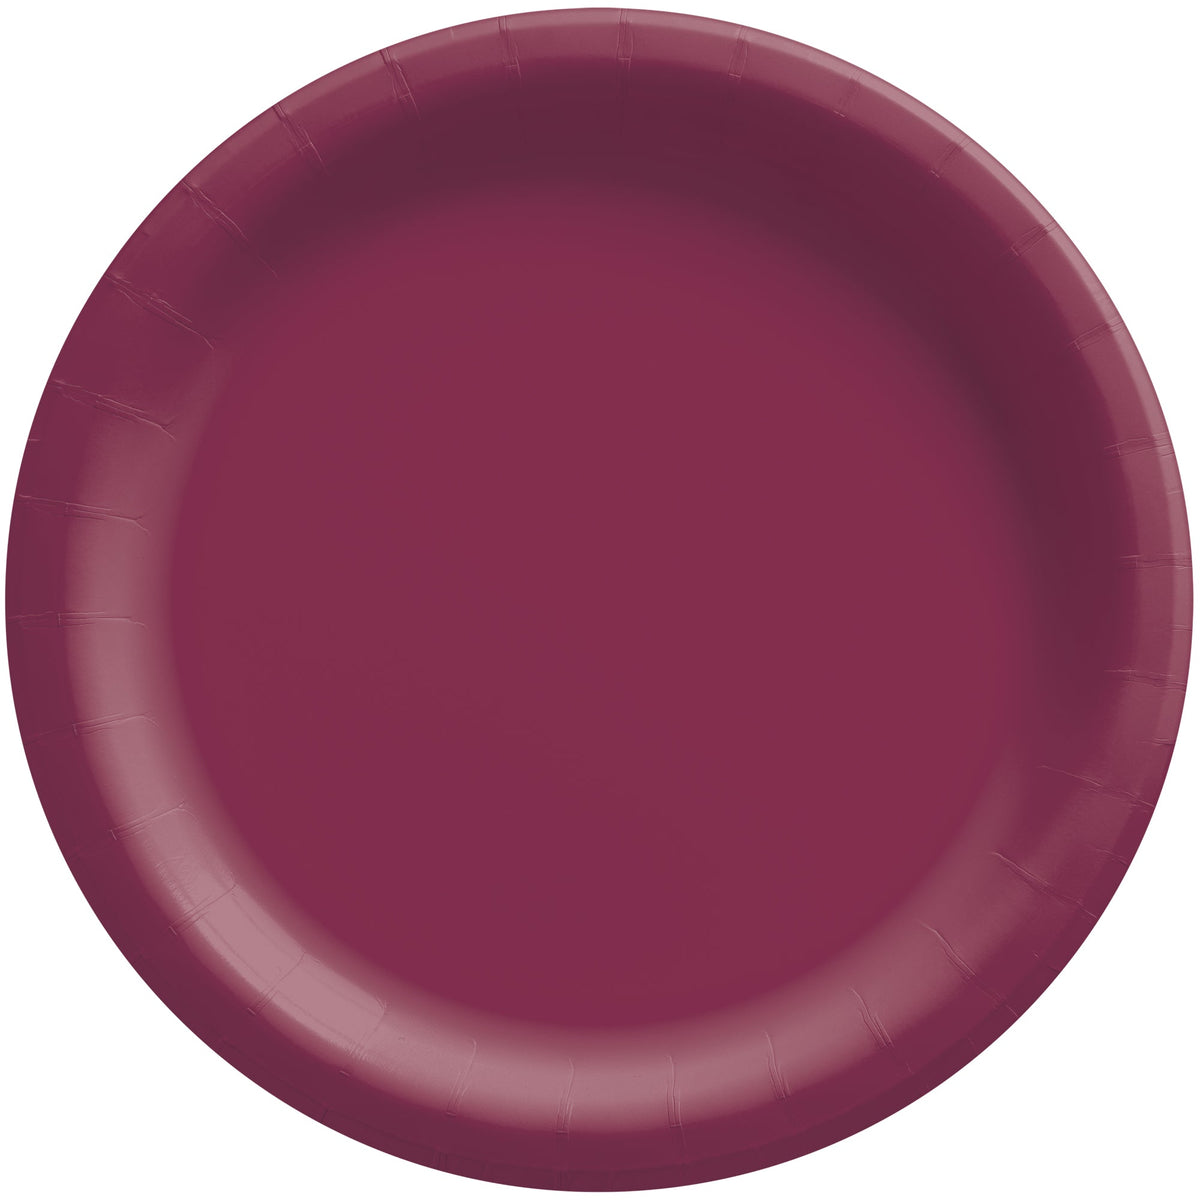 Berry 10" Round Paper Plates, 20 count